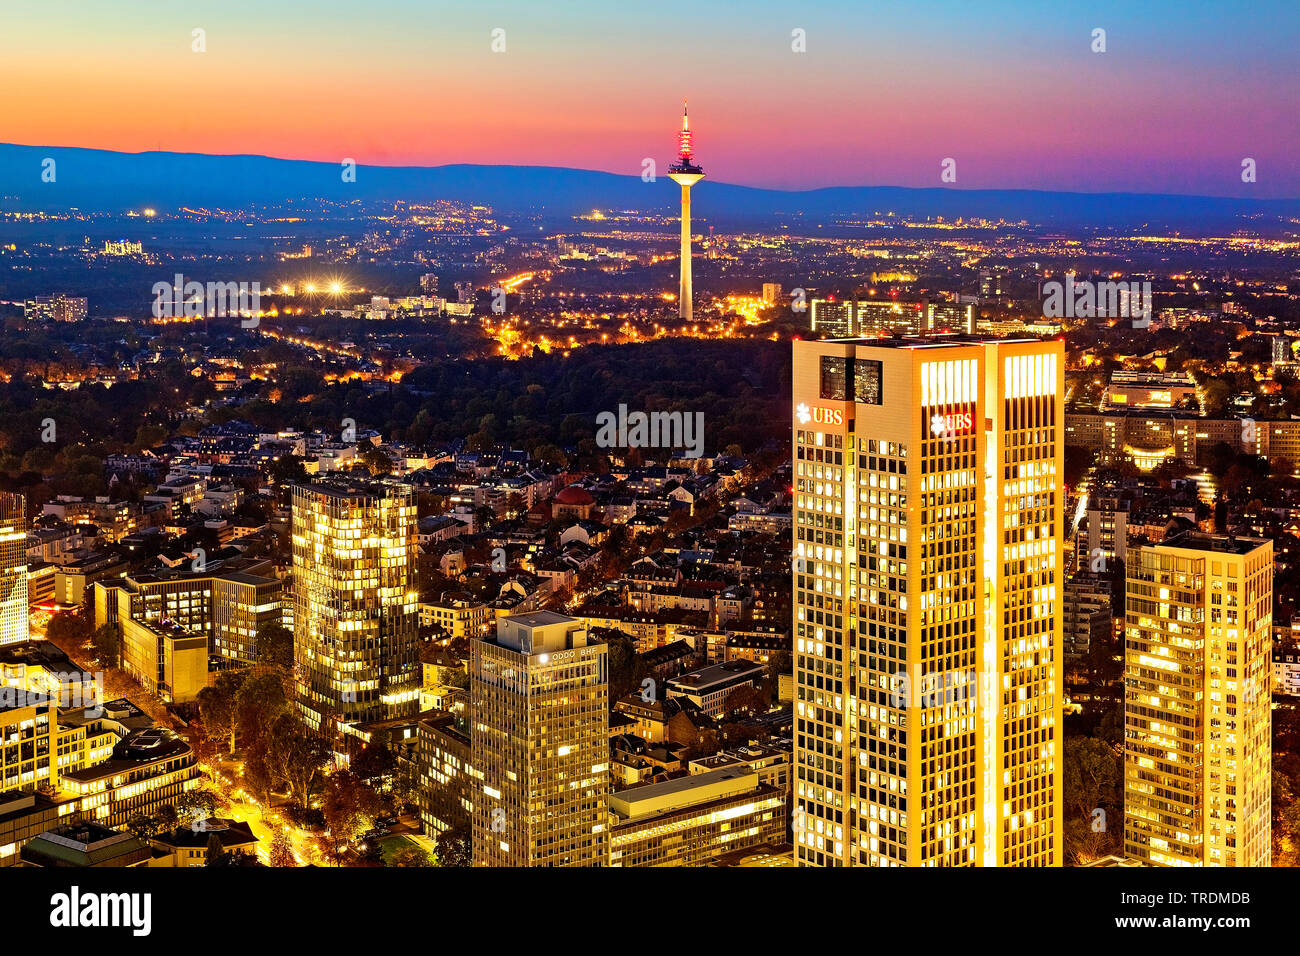 view from Main Tower to the television tower in the evening, Germany, Hesse, Frankfurt am Main Stock Photo